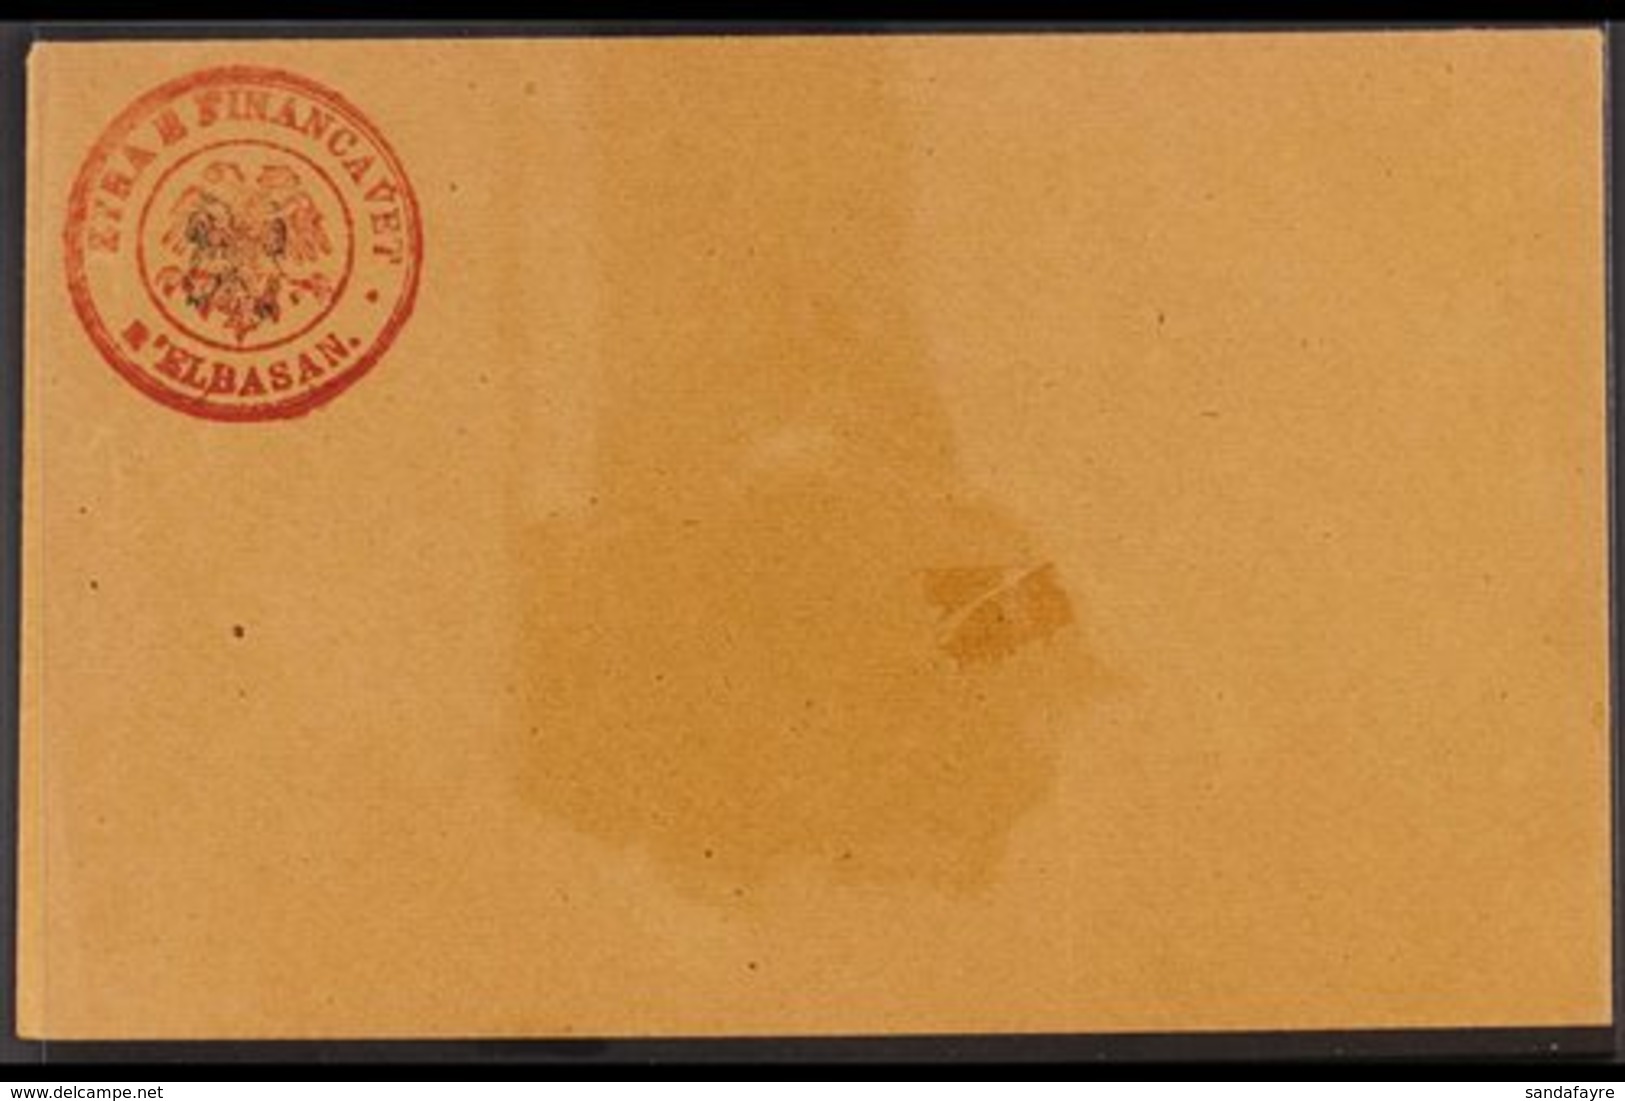 1919 DURRES GOVERNMENT POST.  1919 (1 Gr) Postal Stationery Envelope, Michel U1, Very Fine Unused With Small Mark On Fro - Albanien